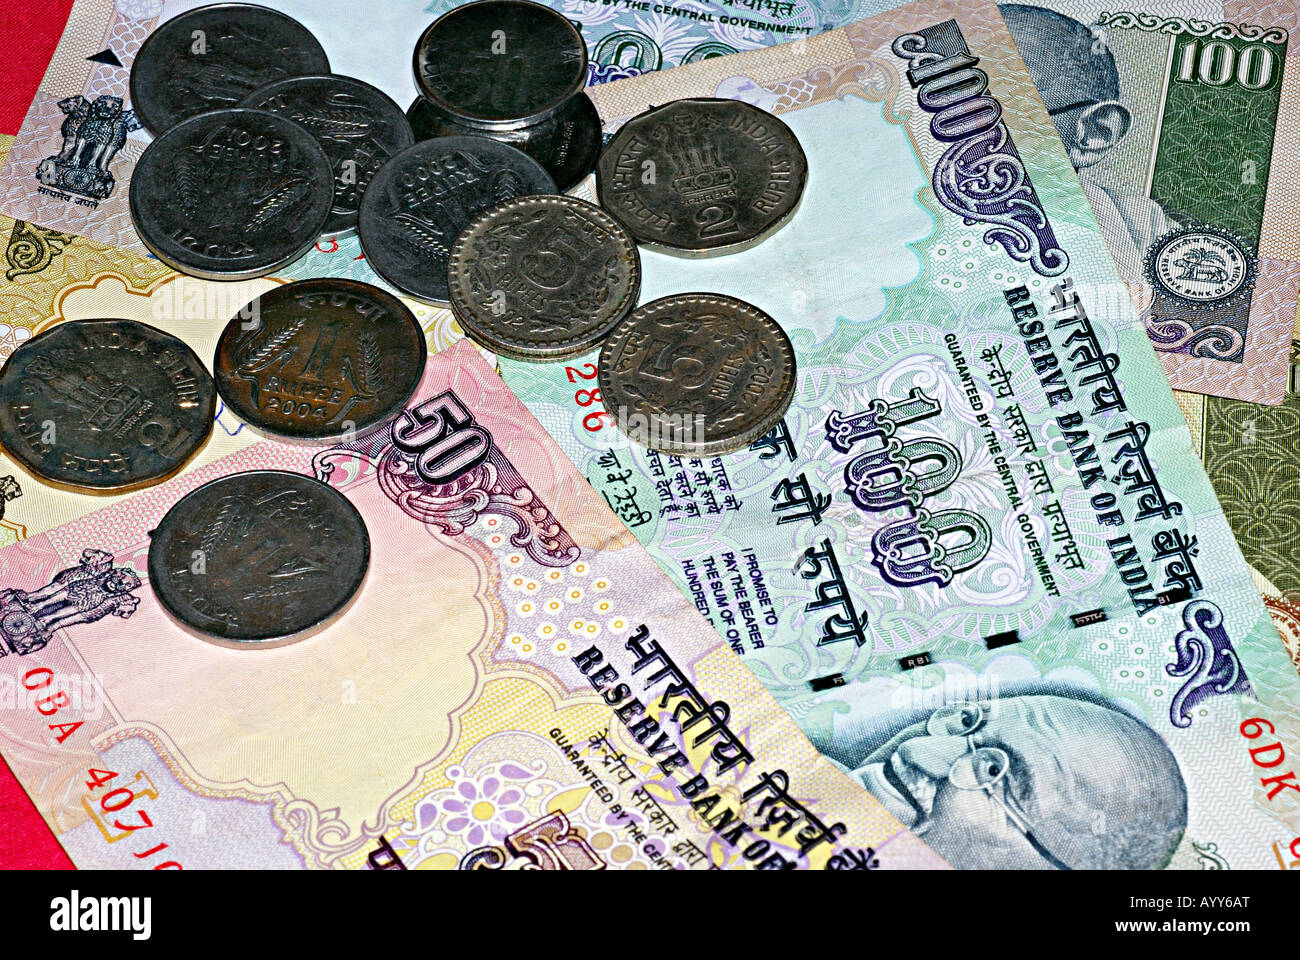 Indian Currency, coins and banknotes. Stock Photo